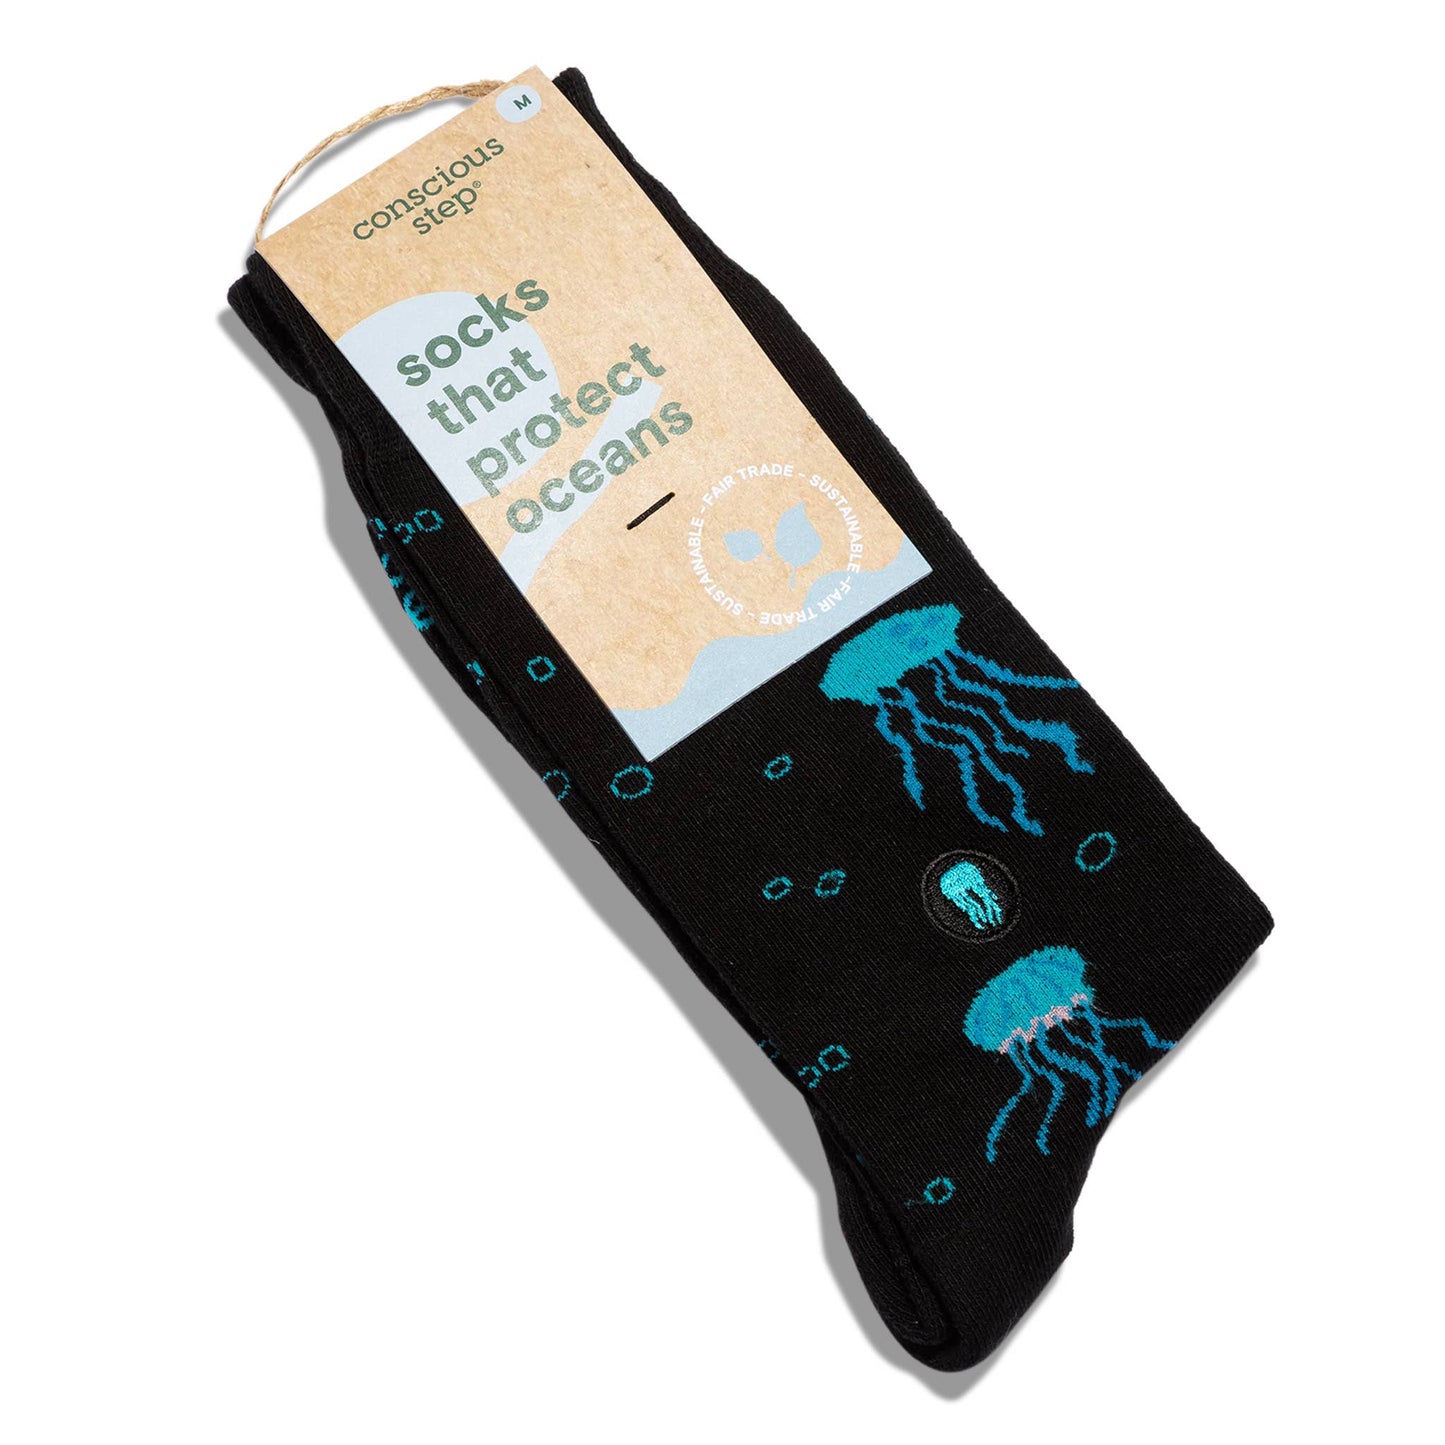 Conscious Step - Socks that Protect Oceans (Black Jellyfish)  Conscious Step   -better made easy-eco-friendly-sustainable-gifting